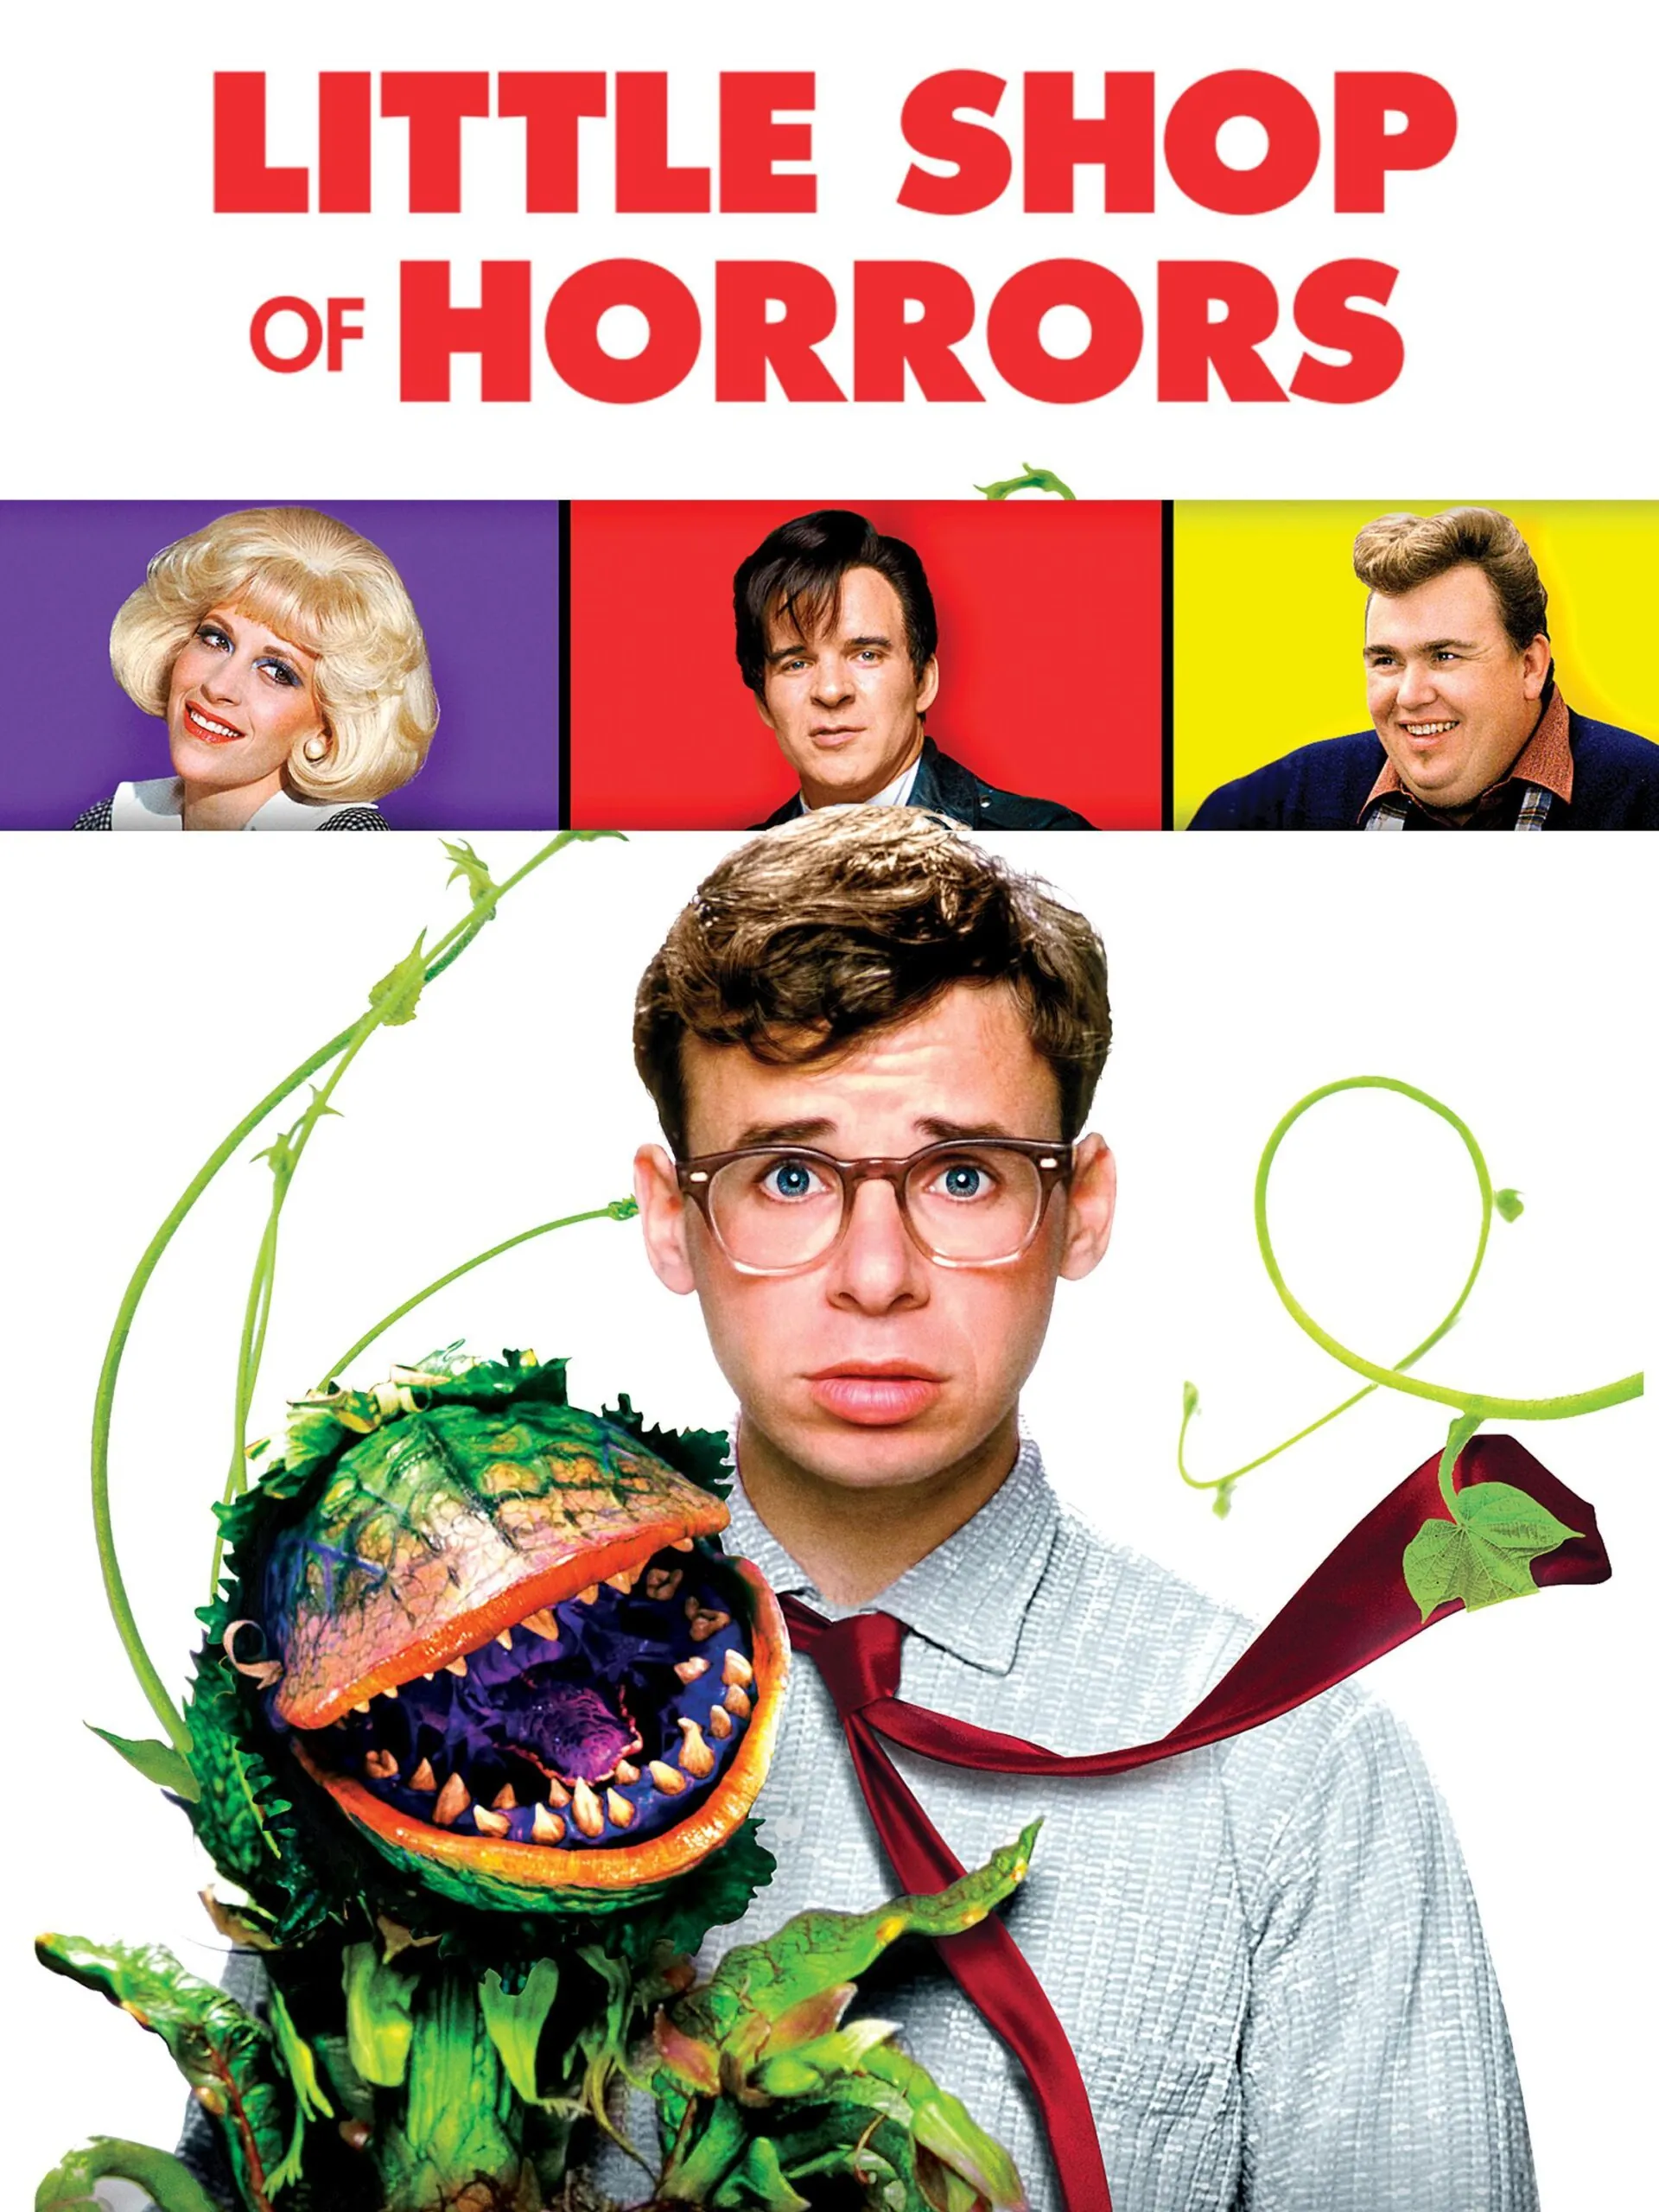 The Little Shop of Horrors 